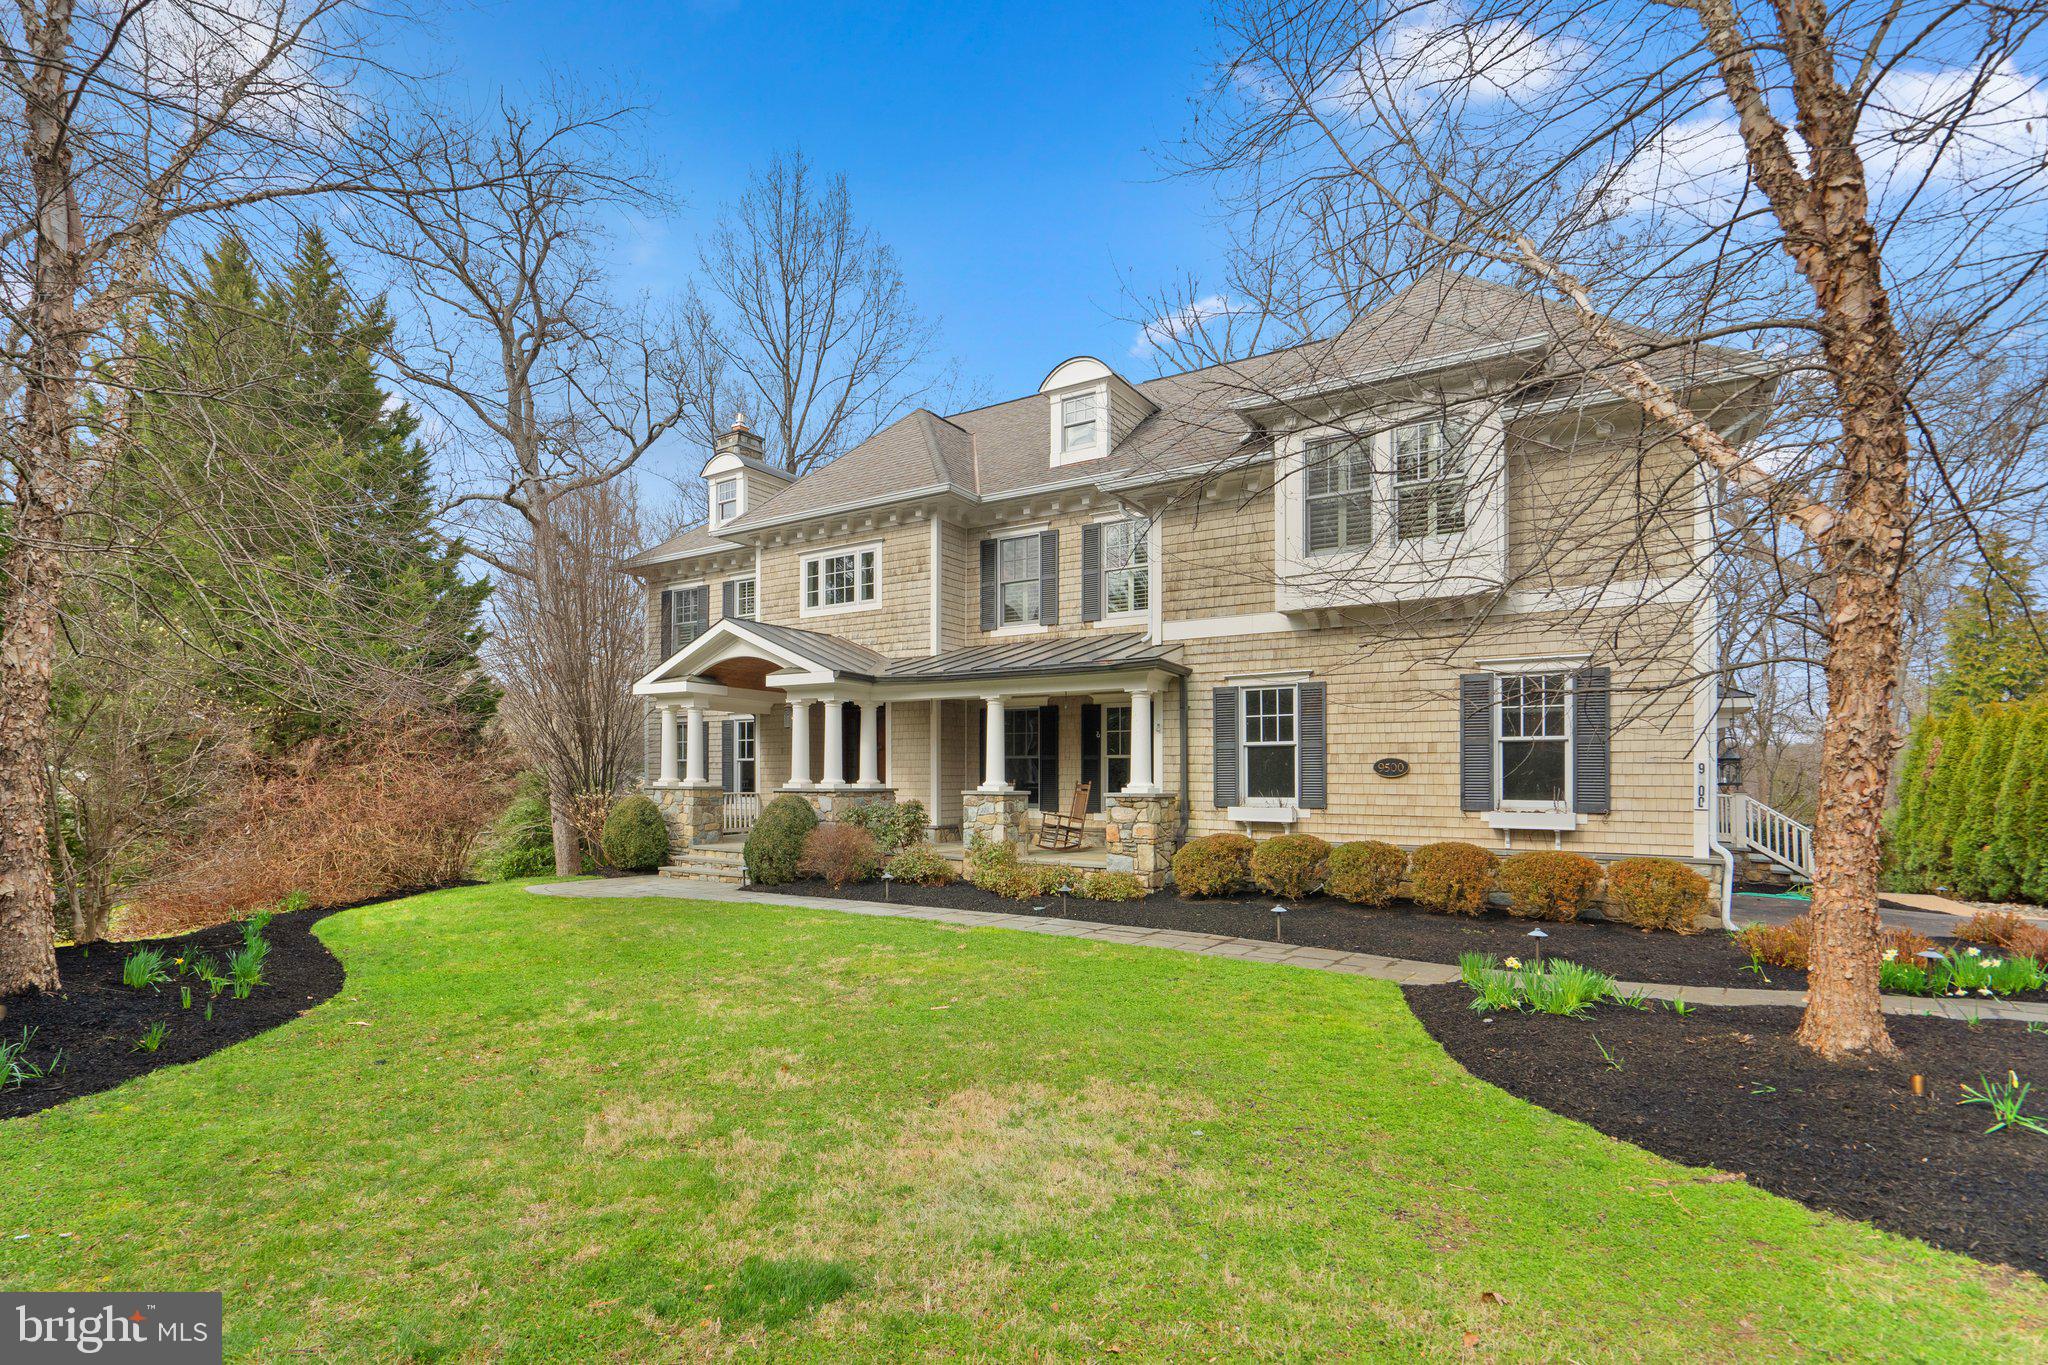 Welcome to 9500 Hemswell Place, a stunning 6-bedroom, 5.5-bathroom home located in highly sought-after Potomac. Constructed in 2005, this beautiful property boasts 9,000 square feet of living space on 3 levels, and is situated on a private, ¾ -acre lot surrounded by lush, mature trees. As you step inside, you'll be greeted by a spacious and bright foyer that leads to a formal living room and dining room, both of which feature large windows and hardwood flooring. The gourmet kitchen is a chef's dream, with its custom cabinetry, stainless steel appliances, marbled countertops, and center island with seating. The kitchen opens to a generous family room with a cozy fireplace, making it the perfect place to relax with family and friends. Upstairs, the enormous master suite features a large sleeping area with a tray ceiling, a sitting area (currently set up as an additional office), and a luxurious spa-like bathroom with dual vanity, soaking tub, and separate shower. Four additional bedrooms, three full bathrooms, and an expansive laundry room complete the upper level of the home. The lower level of the home is finished with room for expansion and offers a recreation room, a sixth bedroom with a full bathroom, and plenty of storage space. Step outside to the backyard and enjoy the patio and hardscape areas with plenty of room for outdoor entertaining. This home also features a side-load 2-car garage and a large driveway that provides plenty of parking for residents and guests. Located just minutes from shopping, dining, and recreational opportunities, 9500 Hemswell Place is a must-see property for those seeking a luxurious and convenient lifestyle in Potomac. Don't miss your chance to call this stunning home your own!